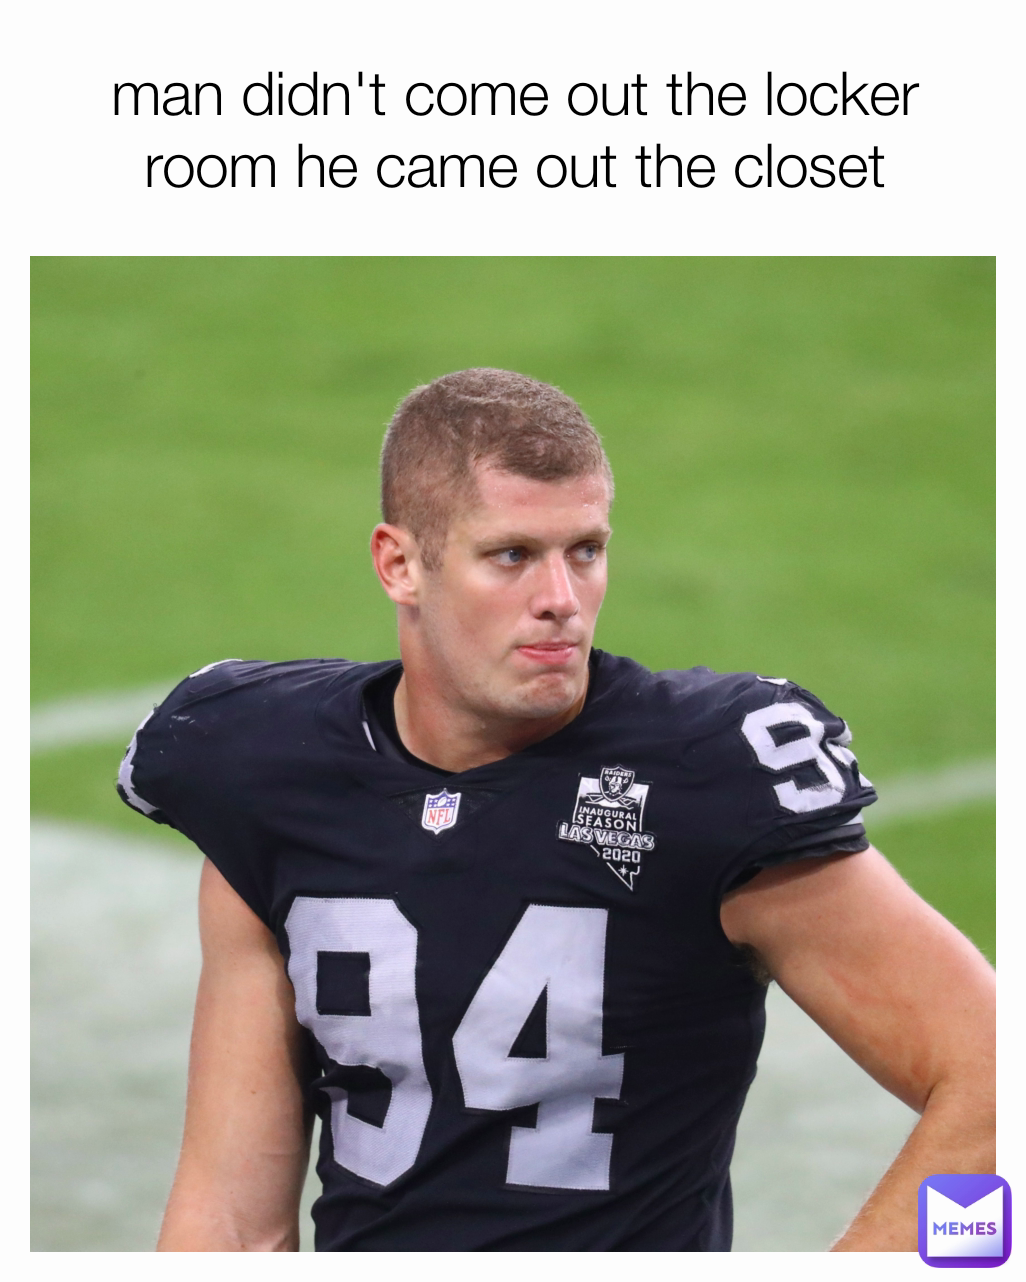 man didn't come out the locker room he came out the closet